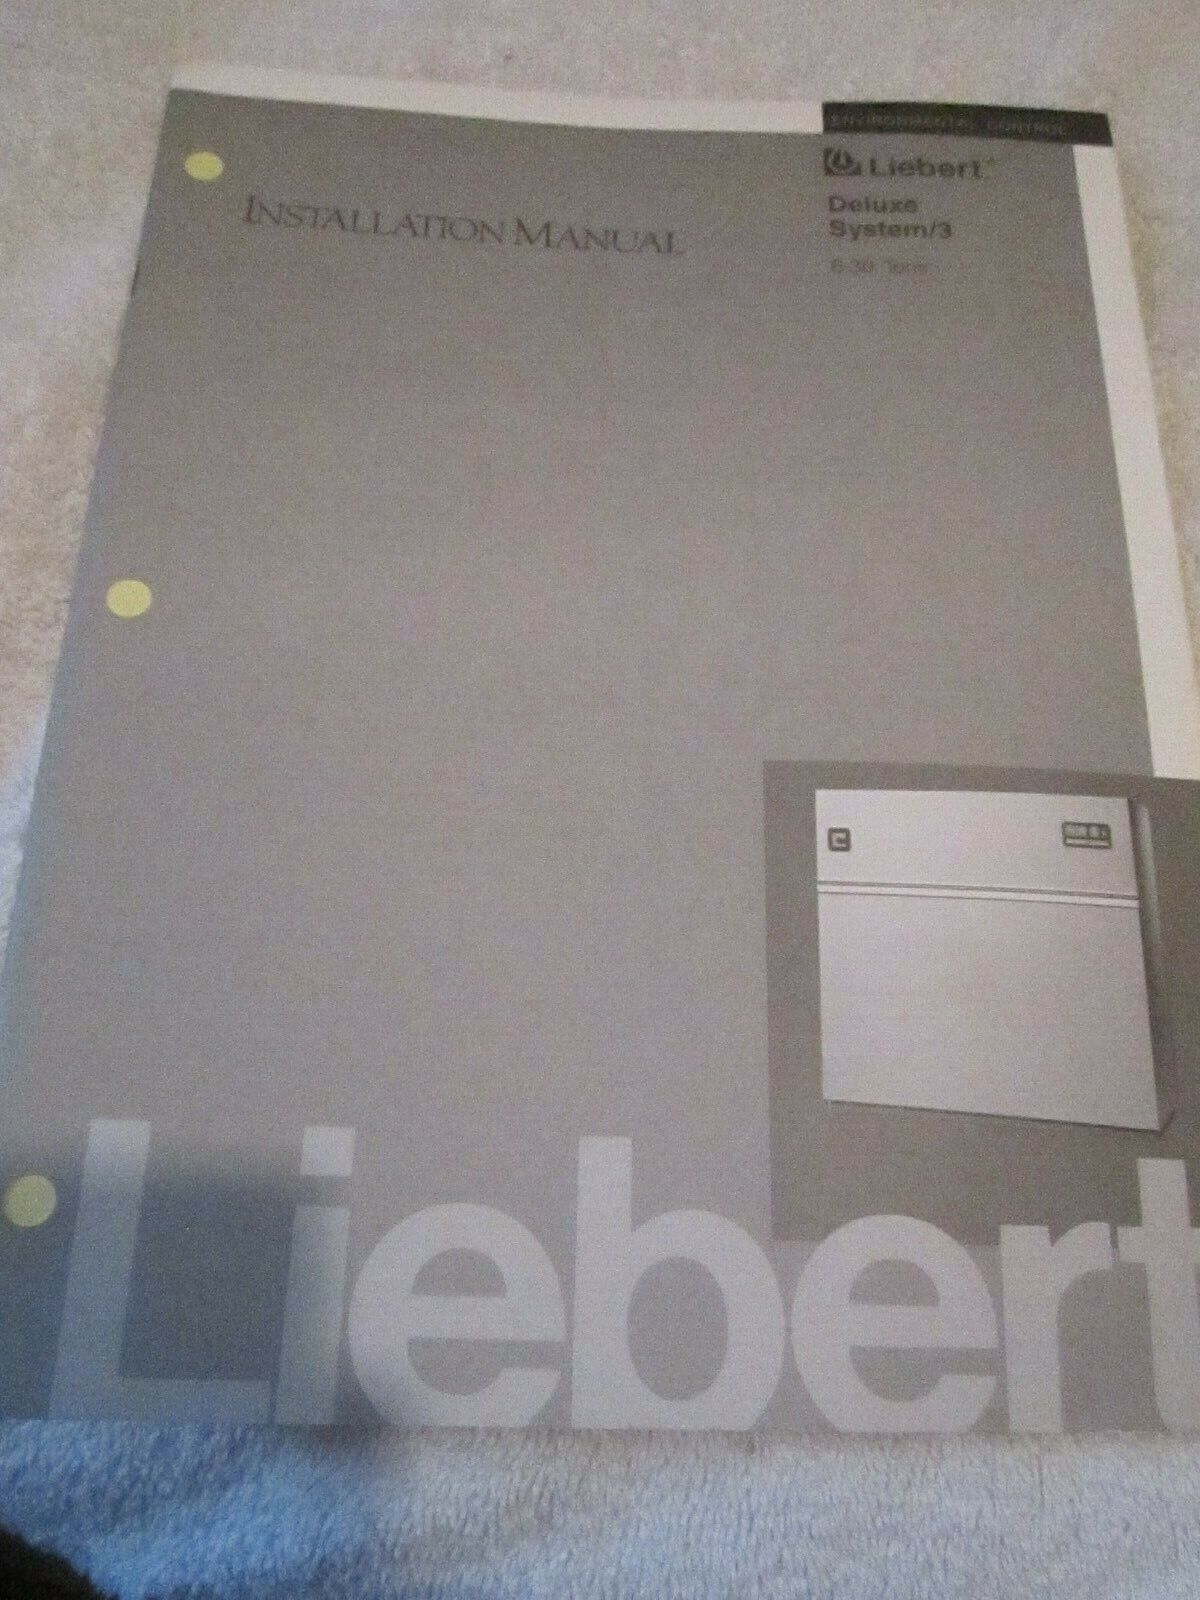 Liebert Deluxe System 3 6-30 Ton Cooling Unit Installation Operation Manual BOOK